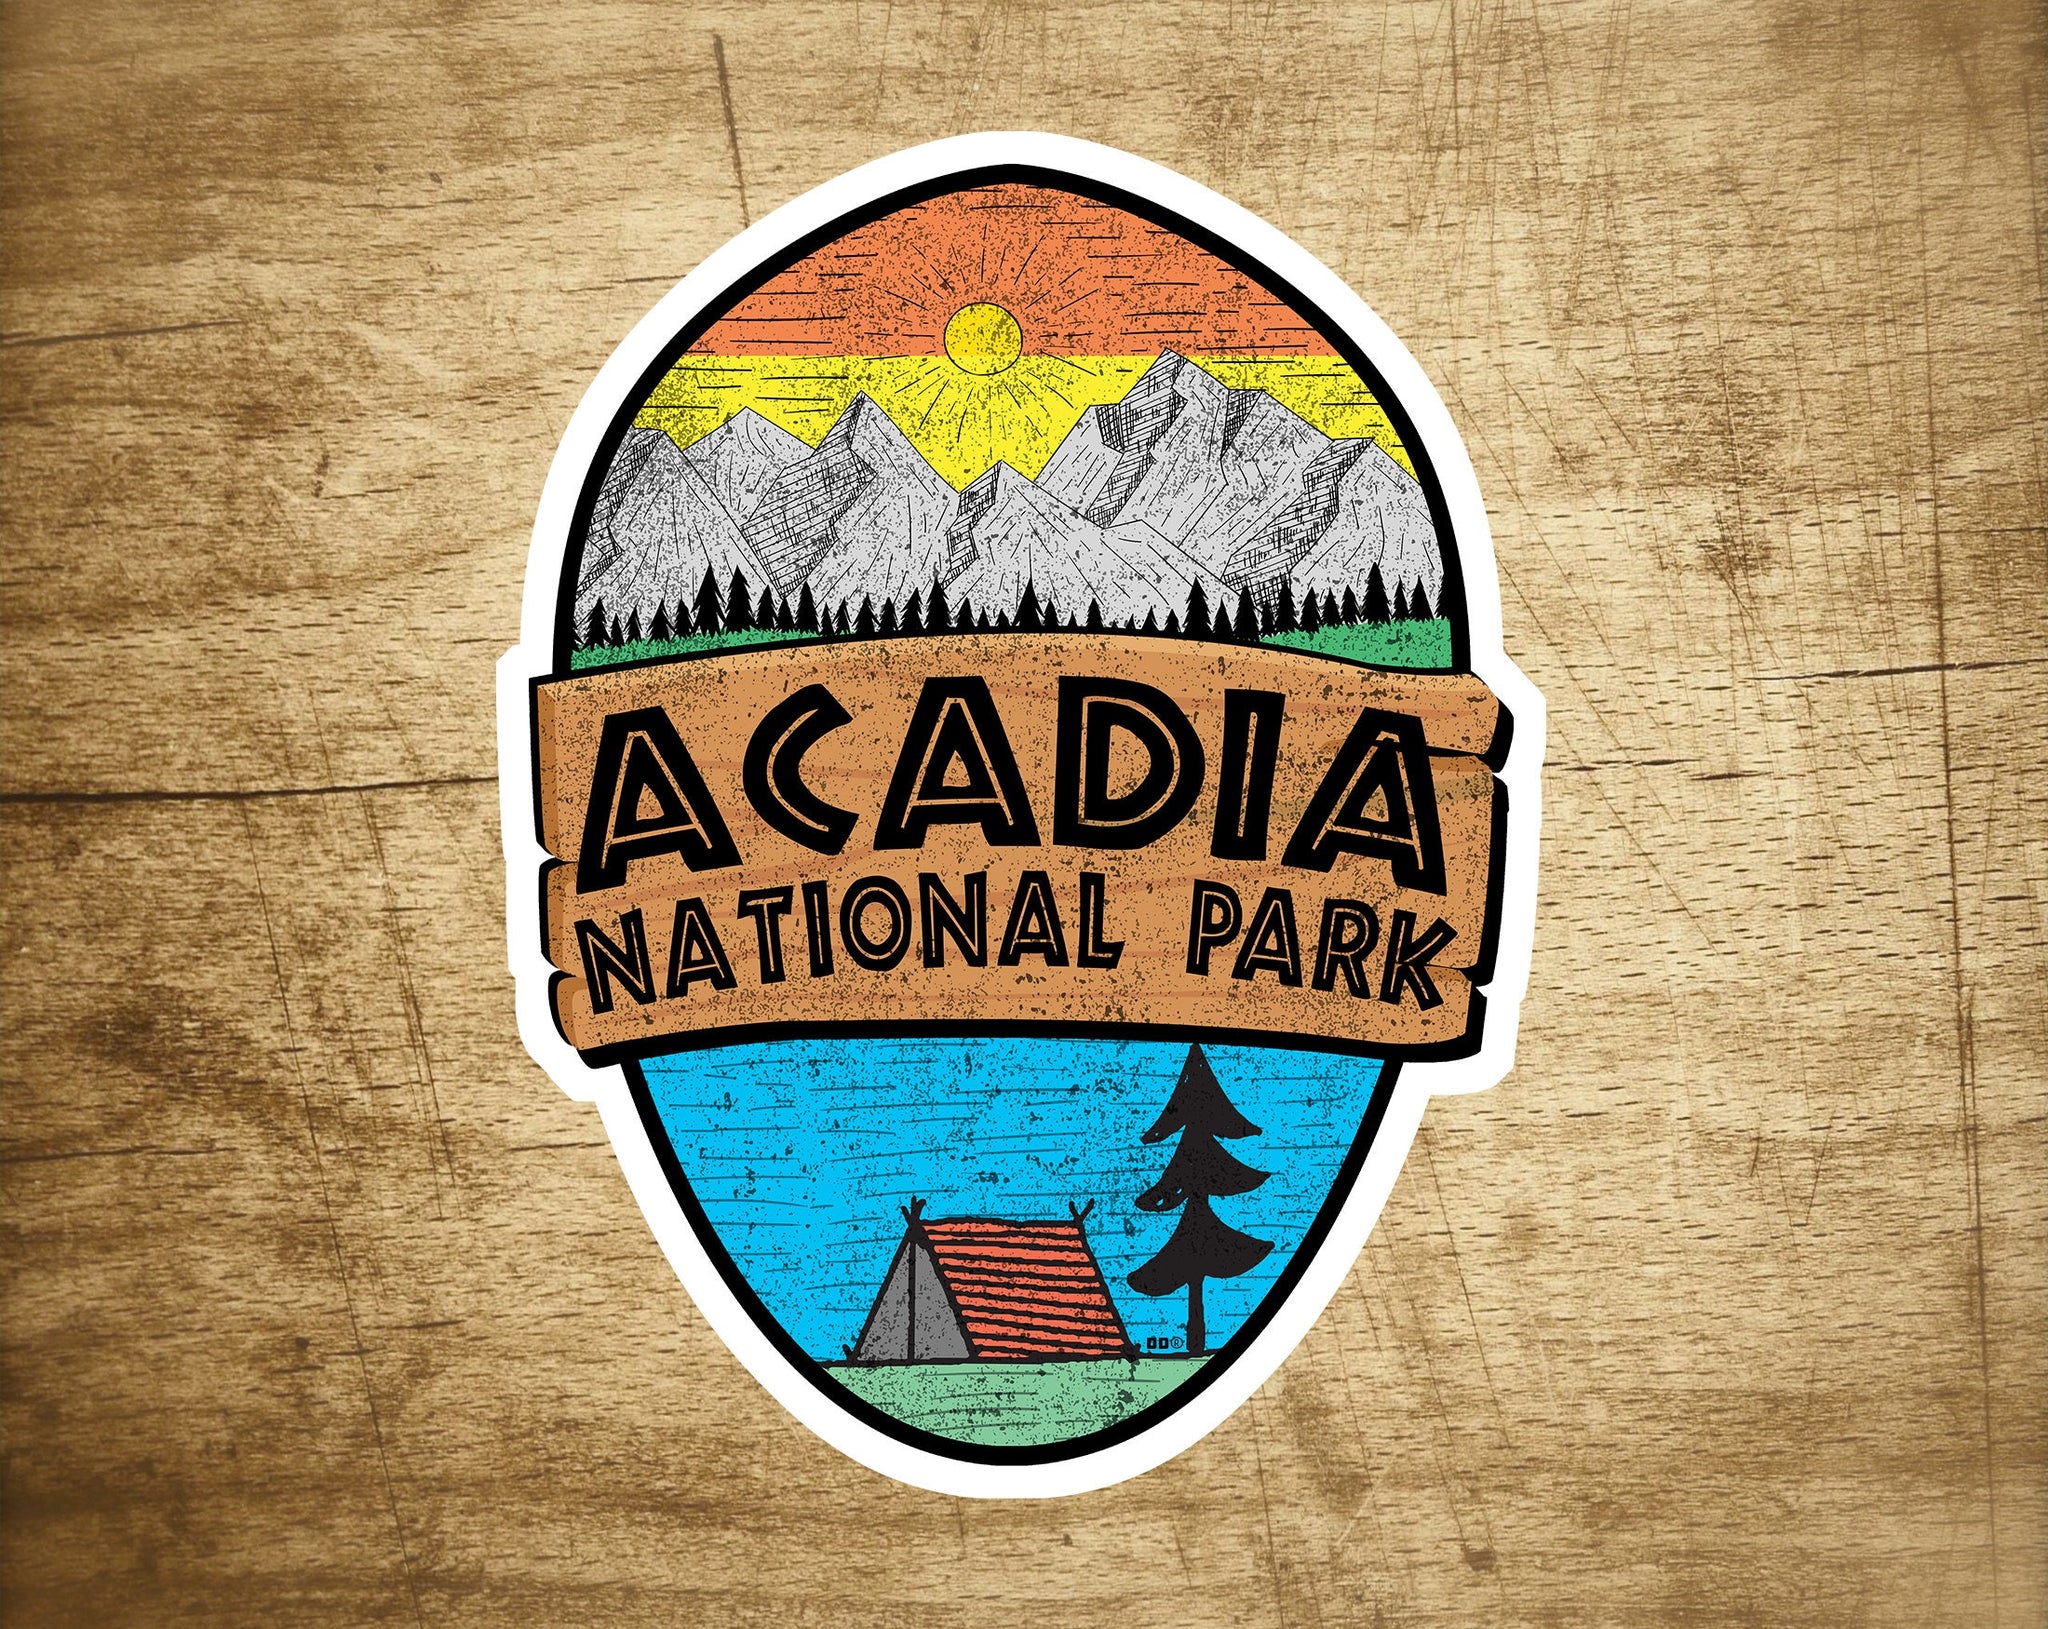 Acadia National Park Maine Sticker Decal 3.75" x 2.8" Vinyl New Distressed Camping